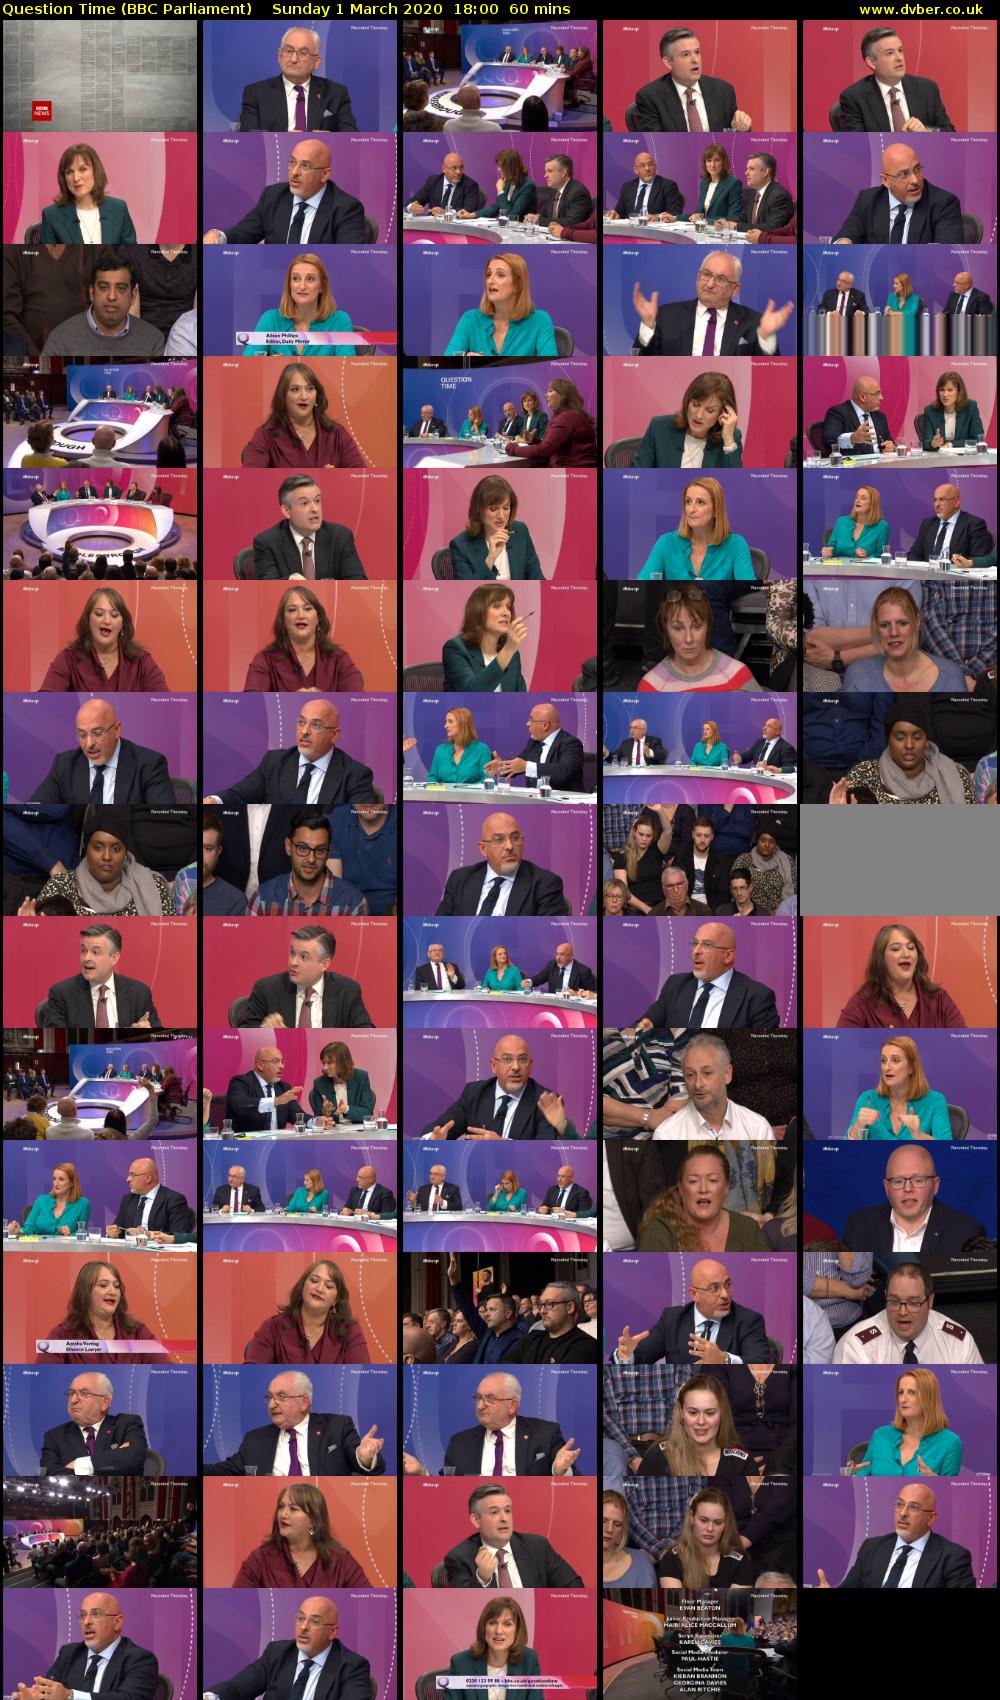 Question Time (BBC Parliament) Sunday 1 March 2020 18:00 - 19:00